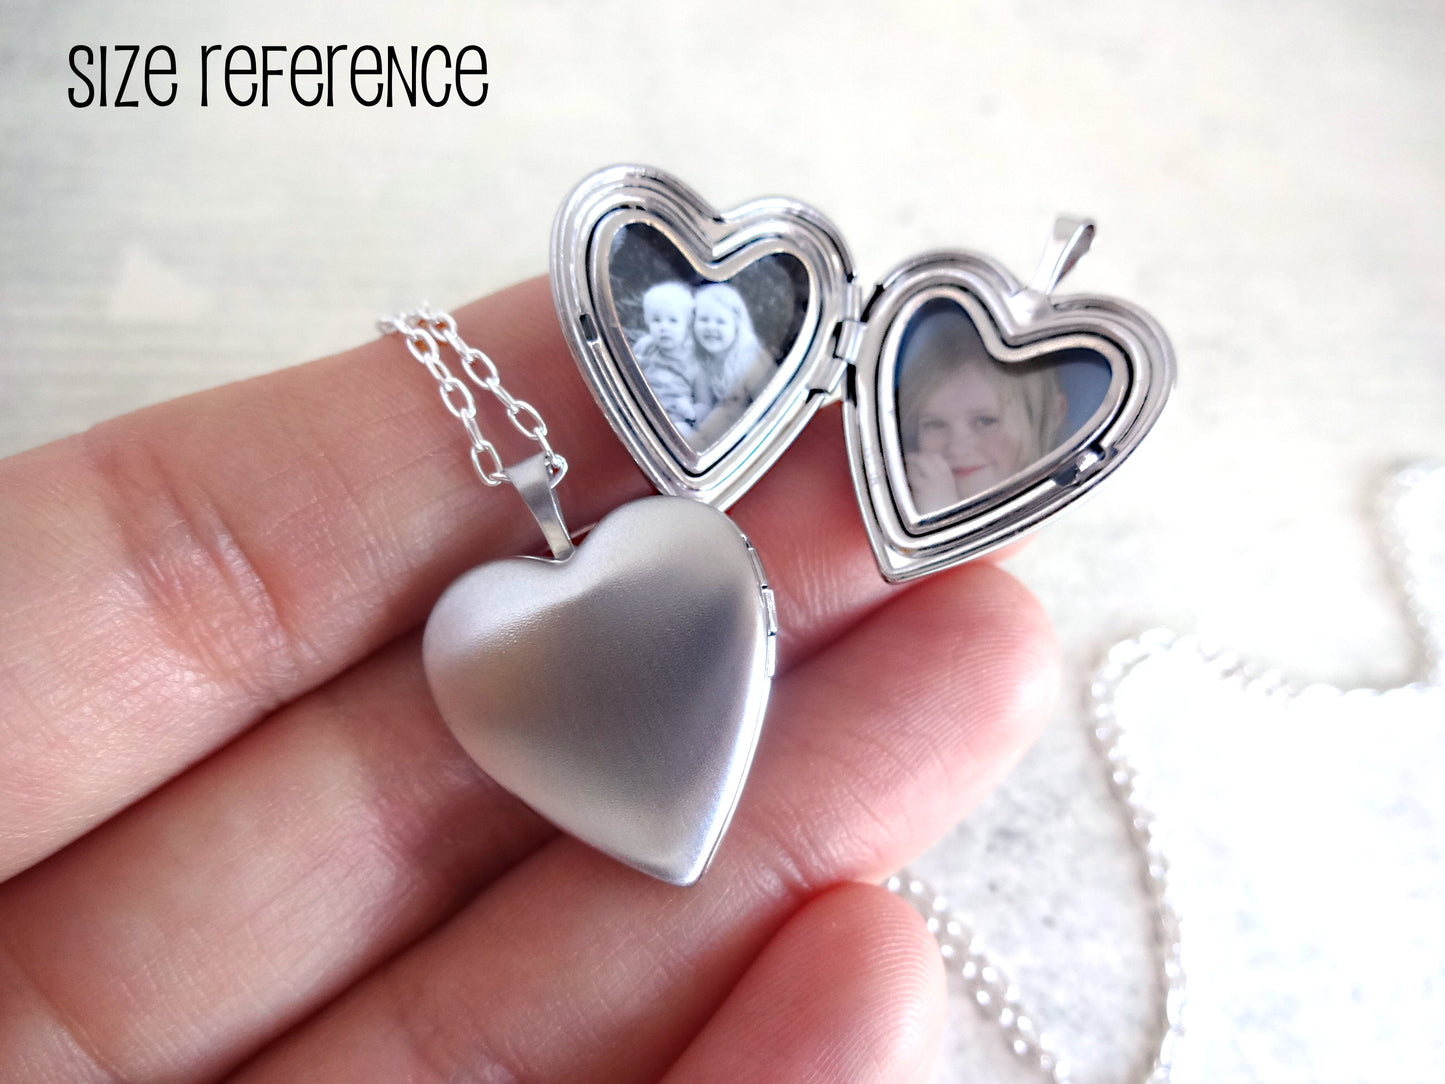 Custom Photo Heart Pet Locket 925 STERLING SILVER  - Paw Print Locket Necklace -  Memorial Pet Heart Remembrance with Optional Engraving